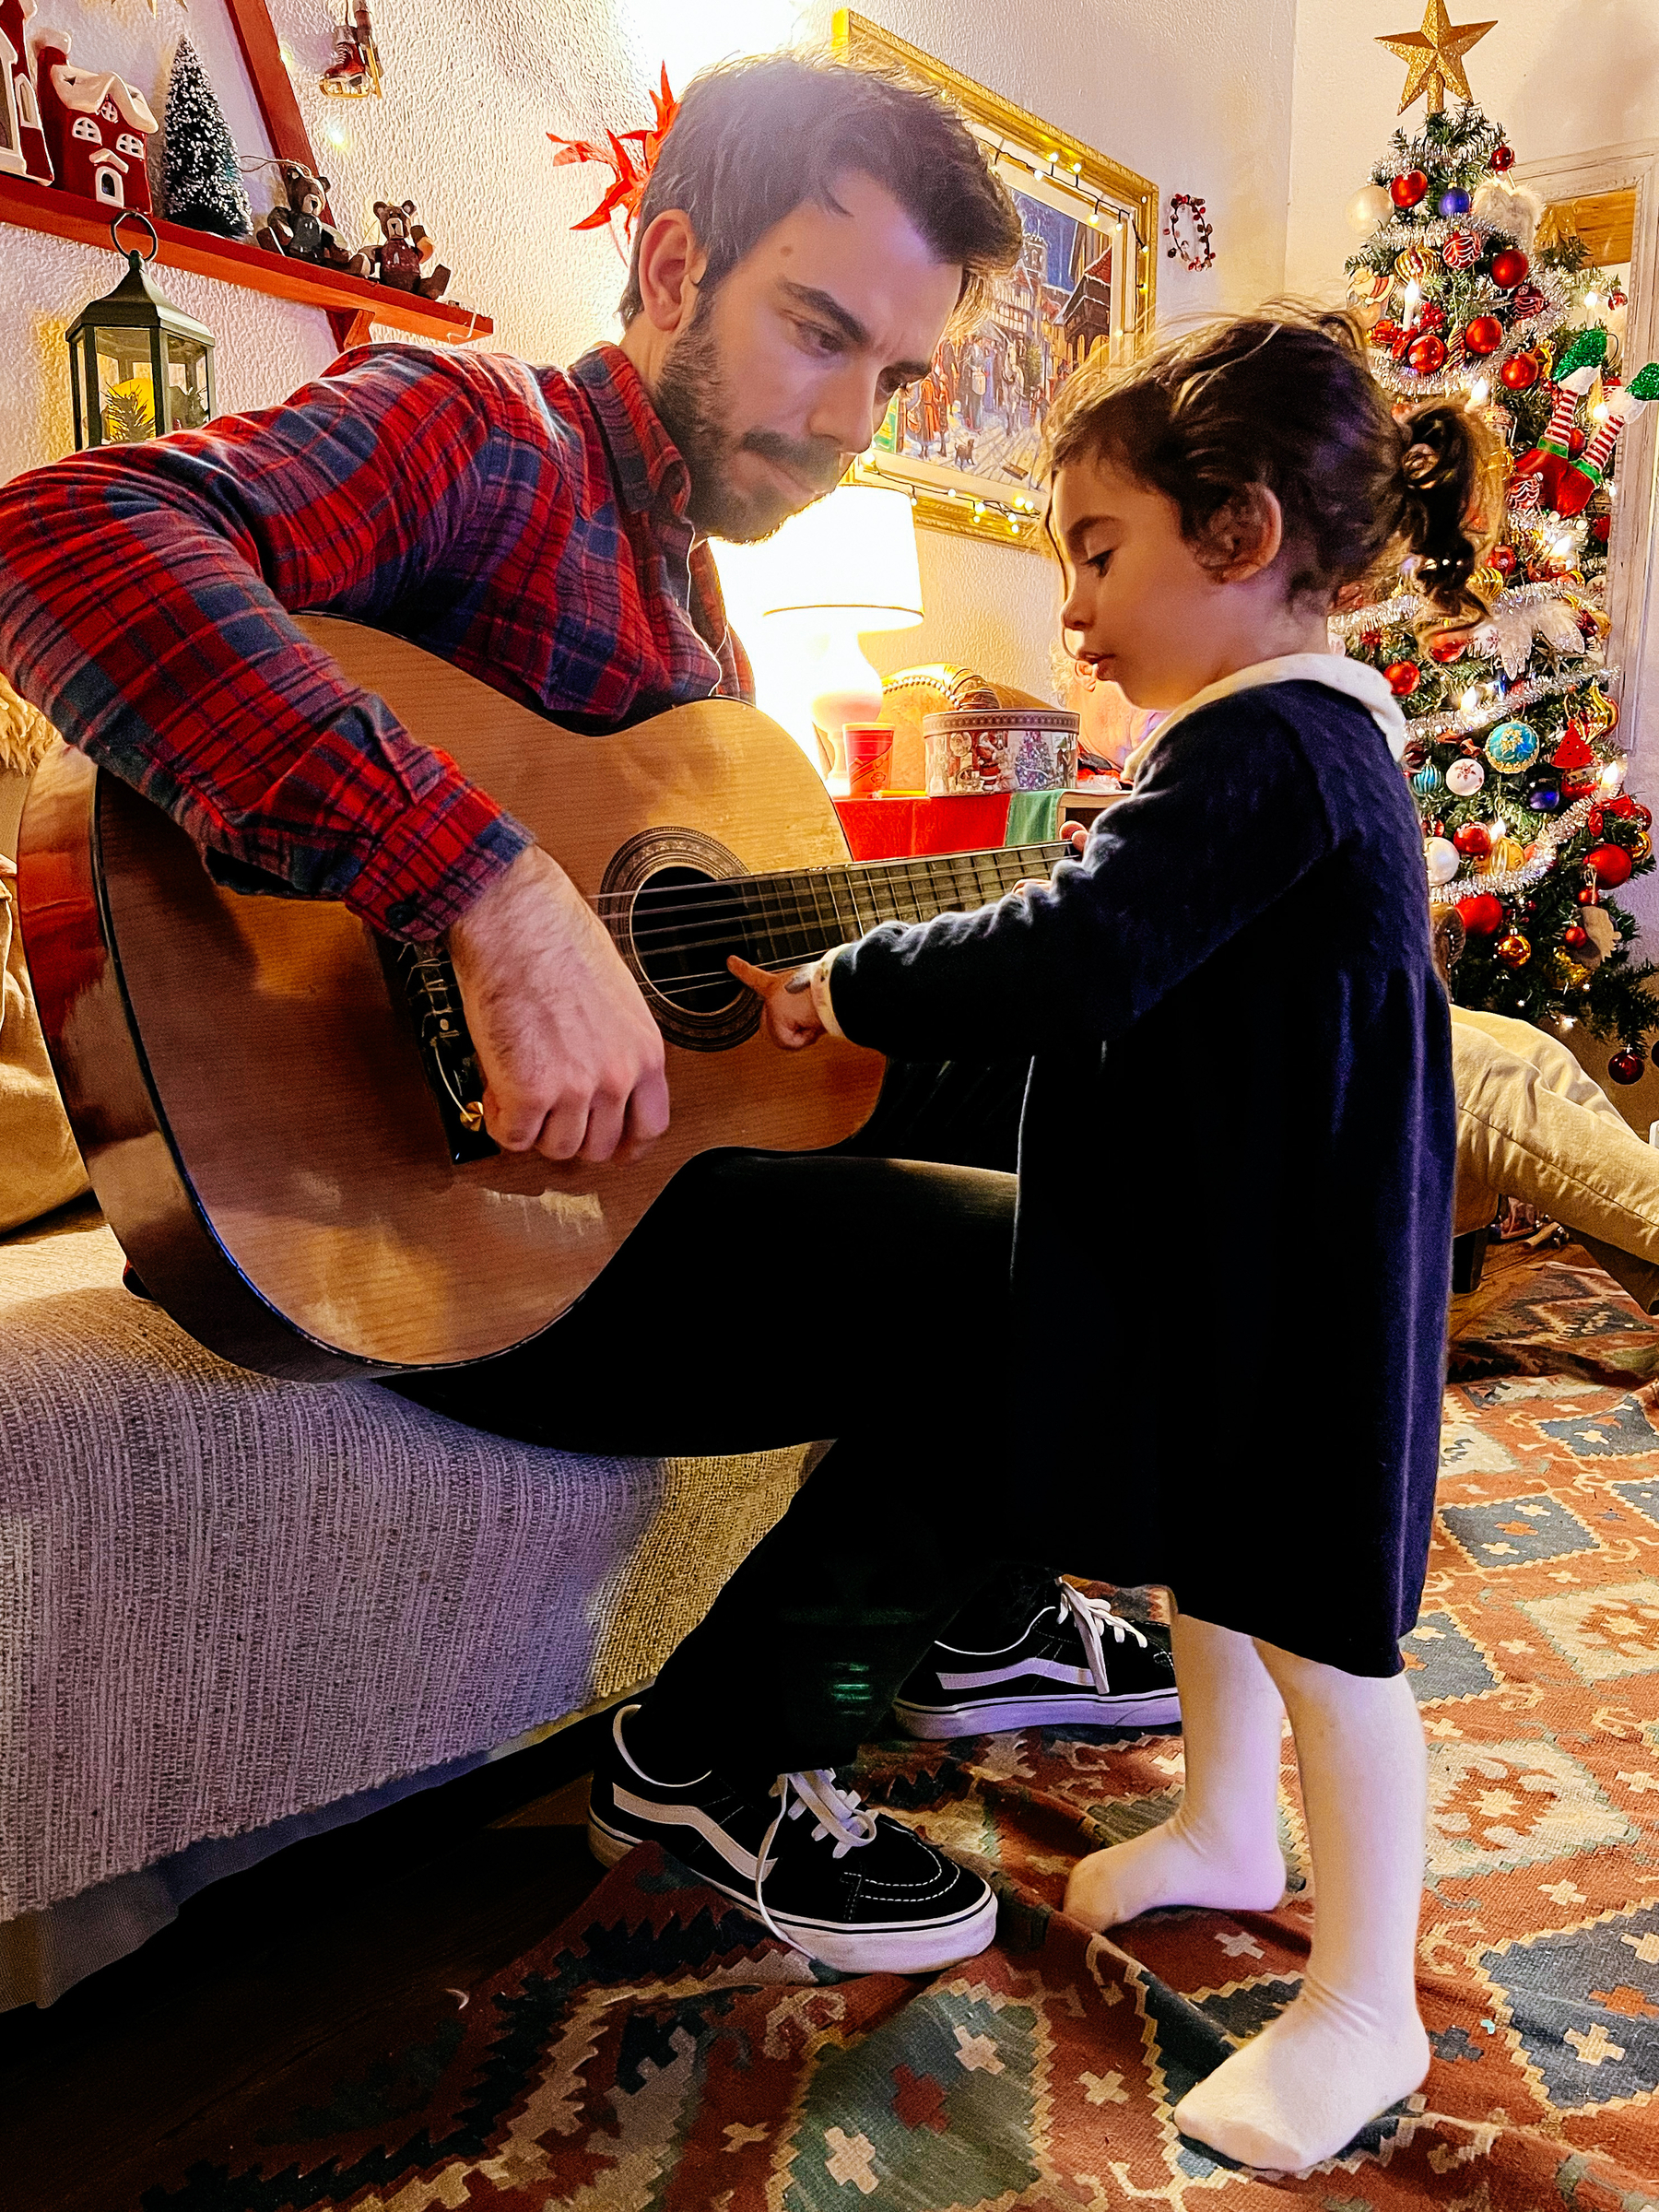 A man holds a guitar while a toddler girls uses her finger to play. The room is fully decked out in Christmas decorations.